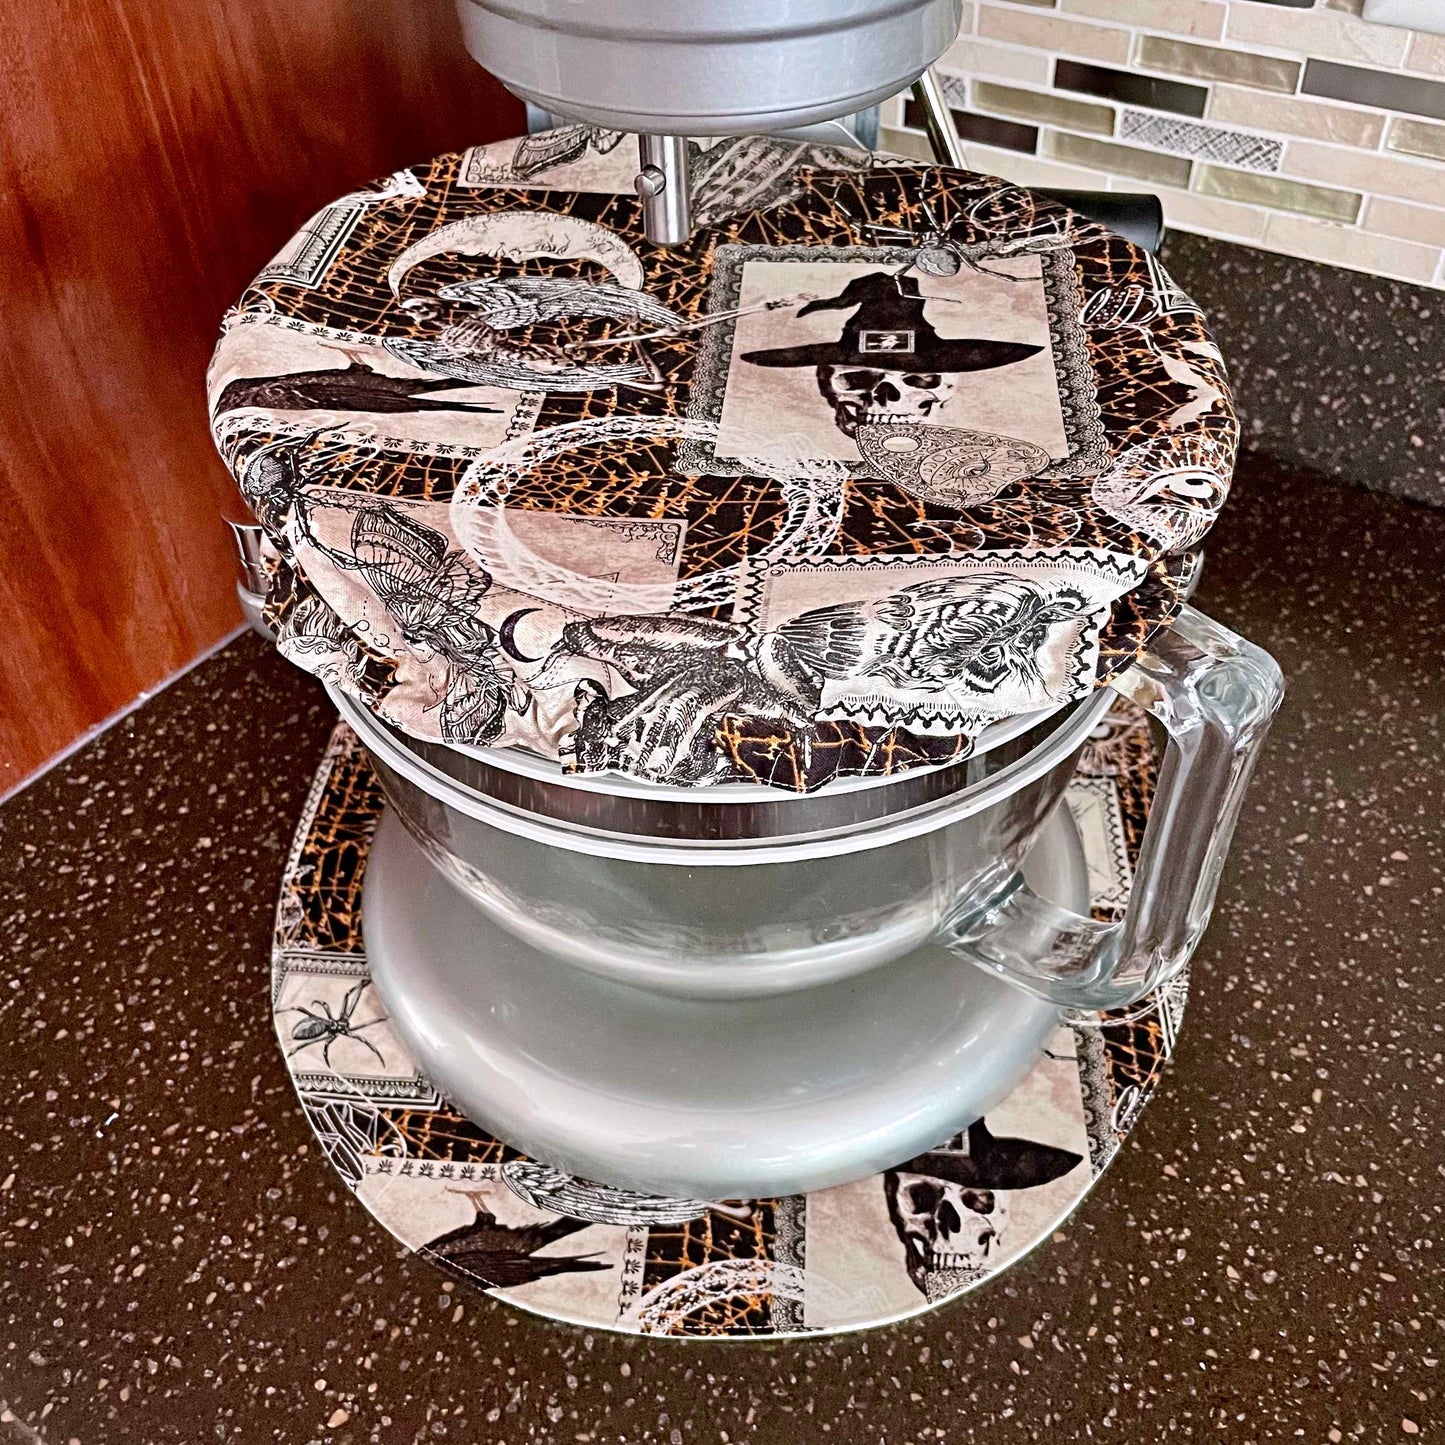 Stand Mixer Bowl Covers -  Goth Decor Fabric Bowl Cover